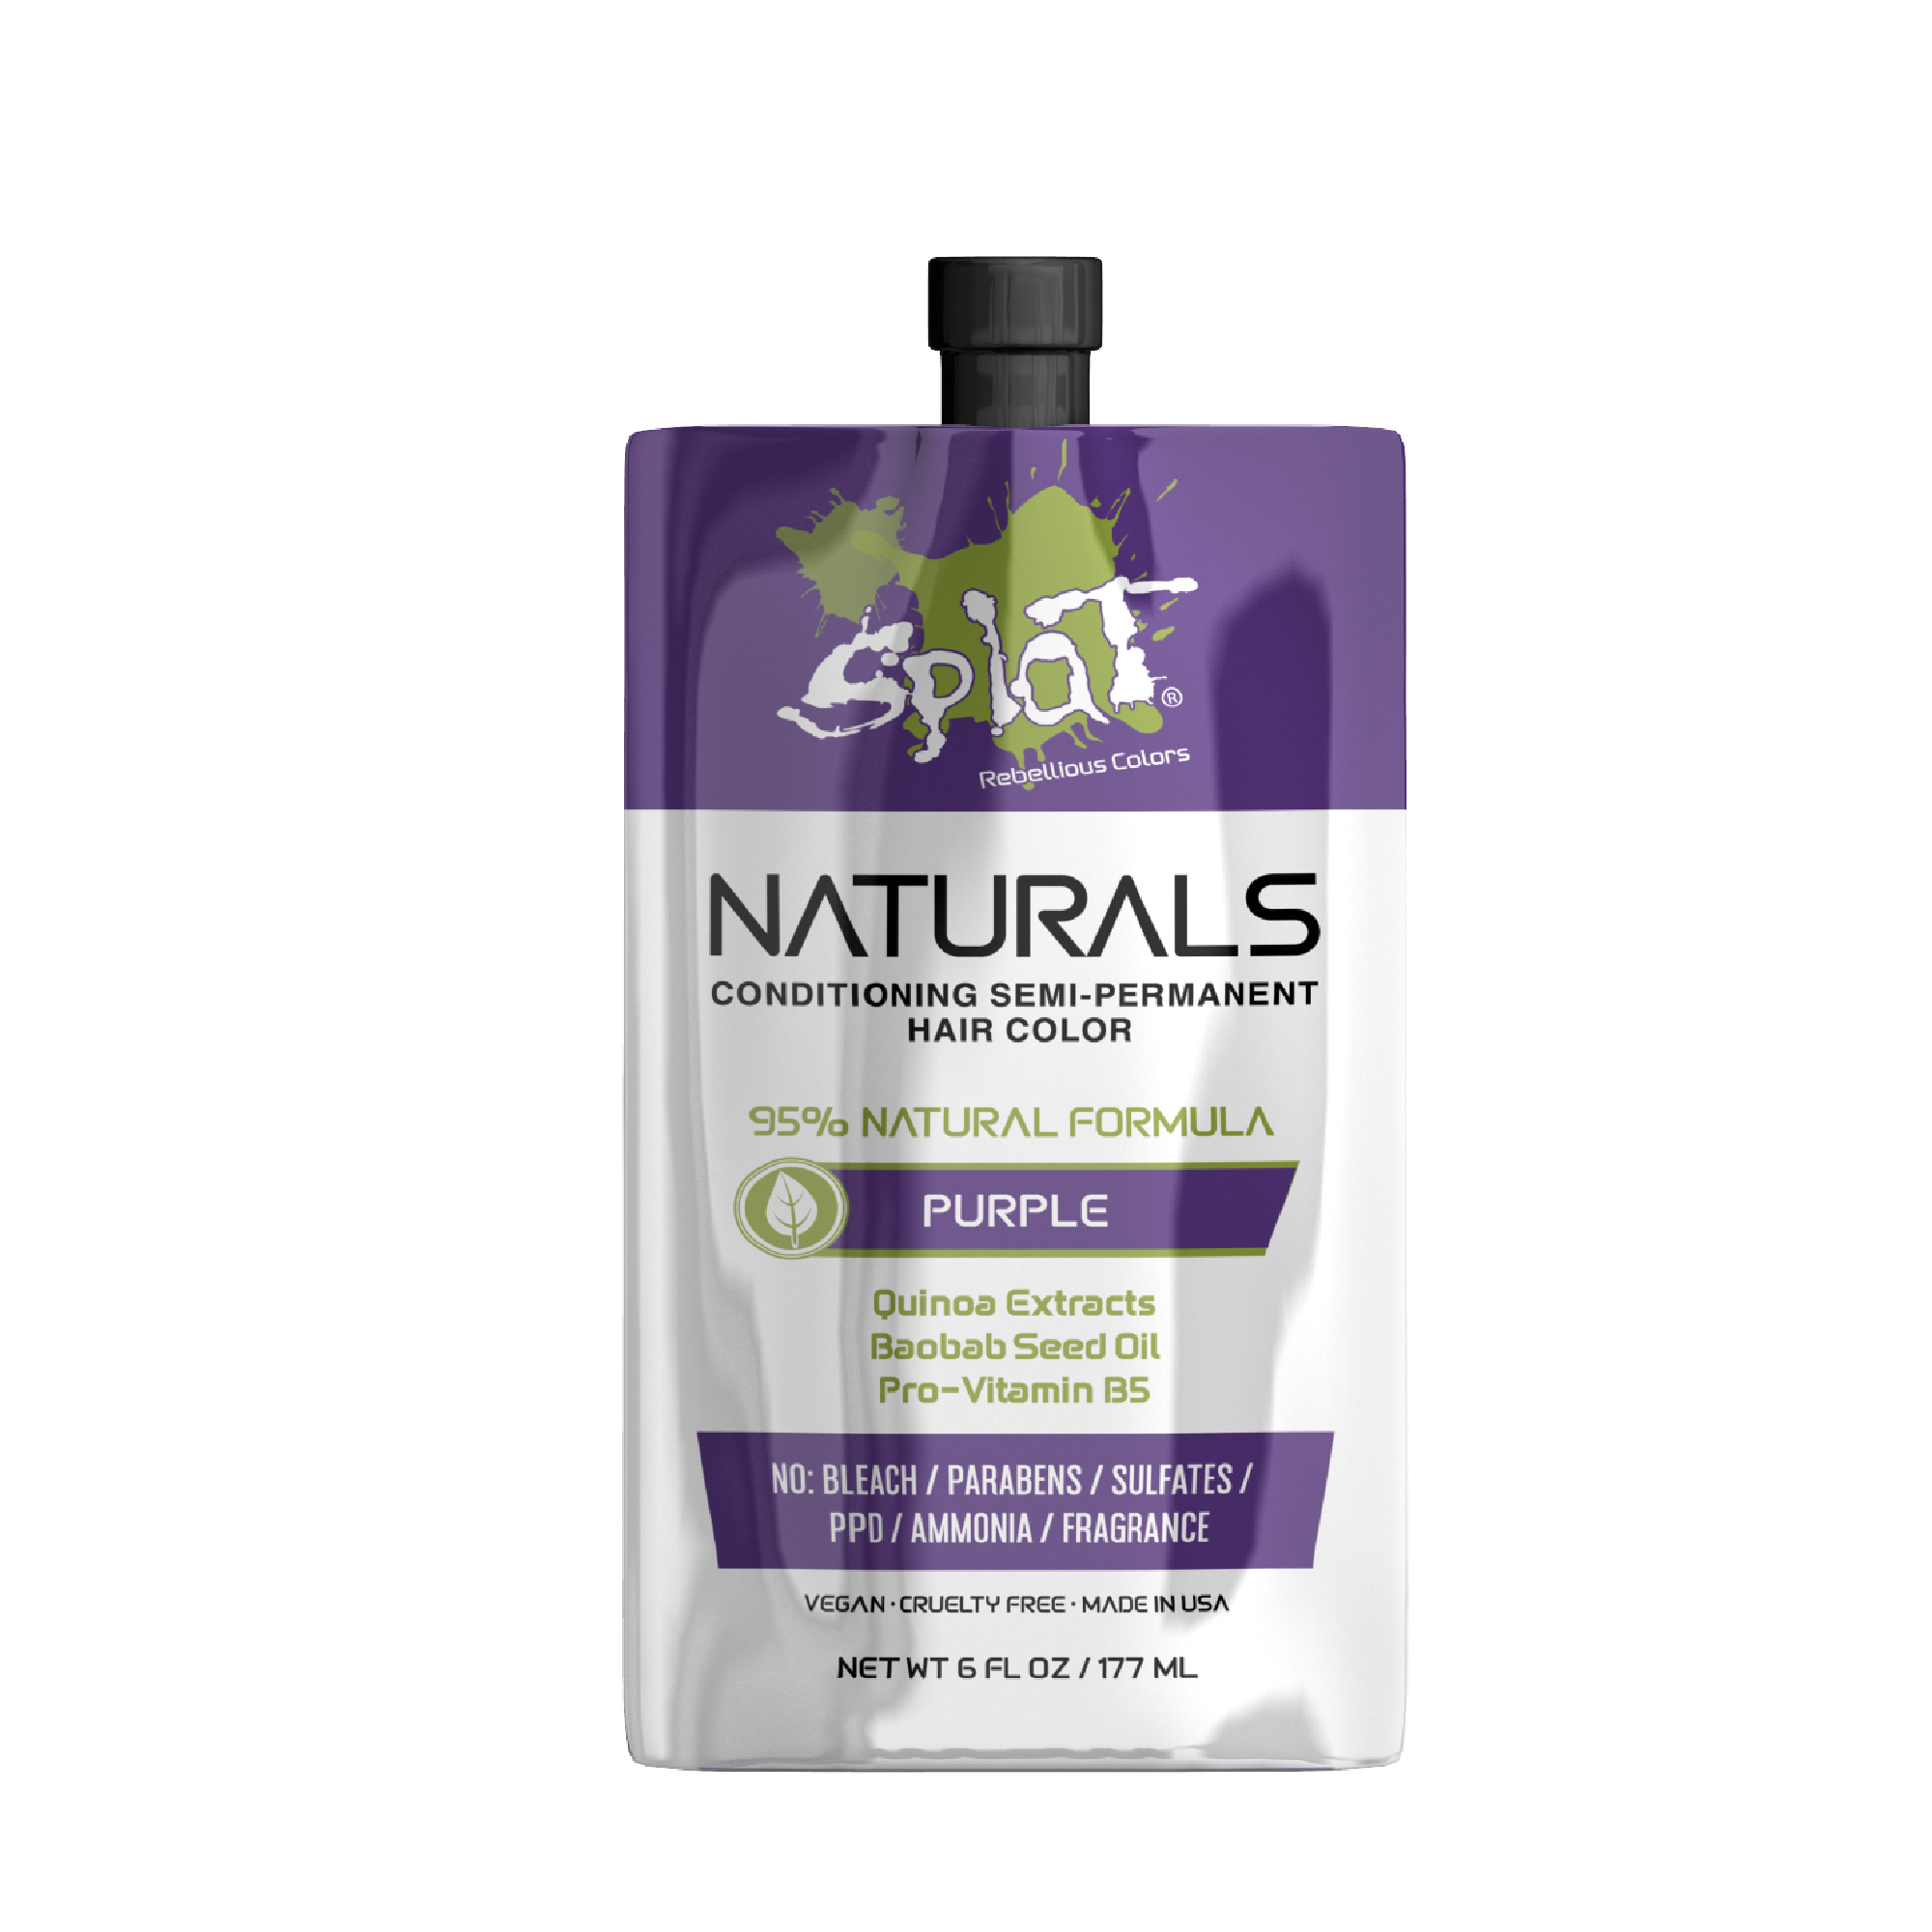 Splat Naturals Conditioning Hair Color, Semi-Permanent Hair Dye, Purple, 6 fl oz Pouch - image 1 of 4